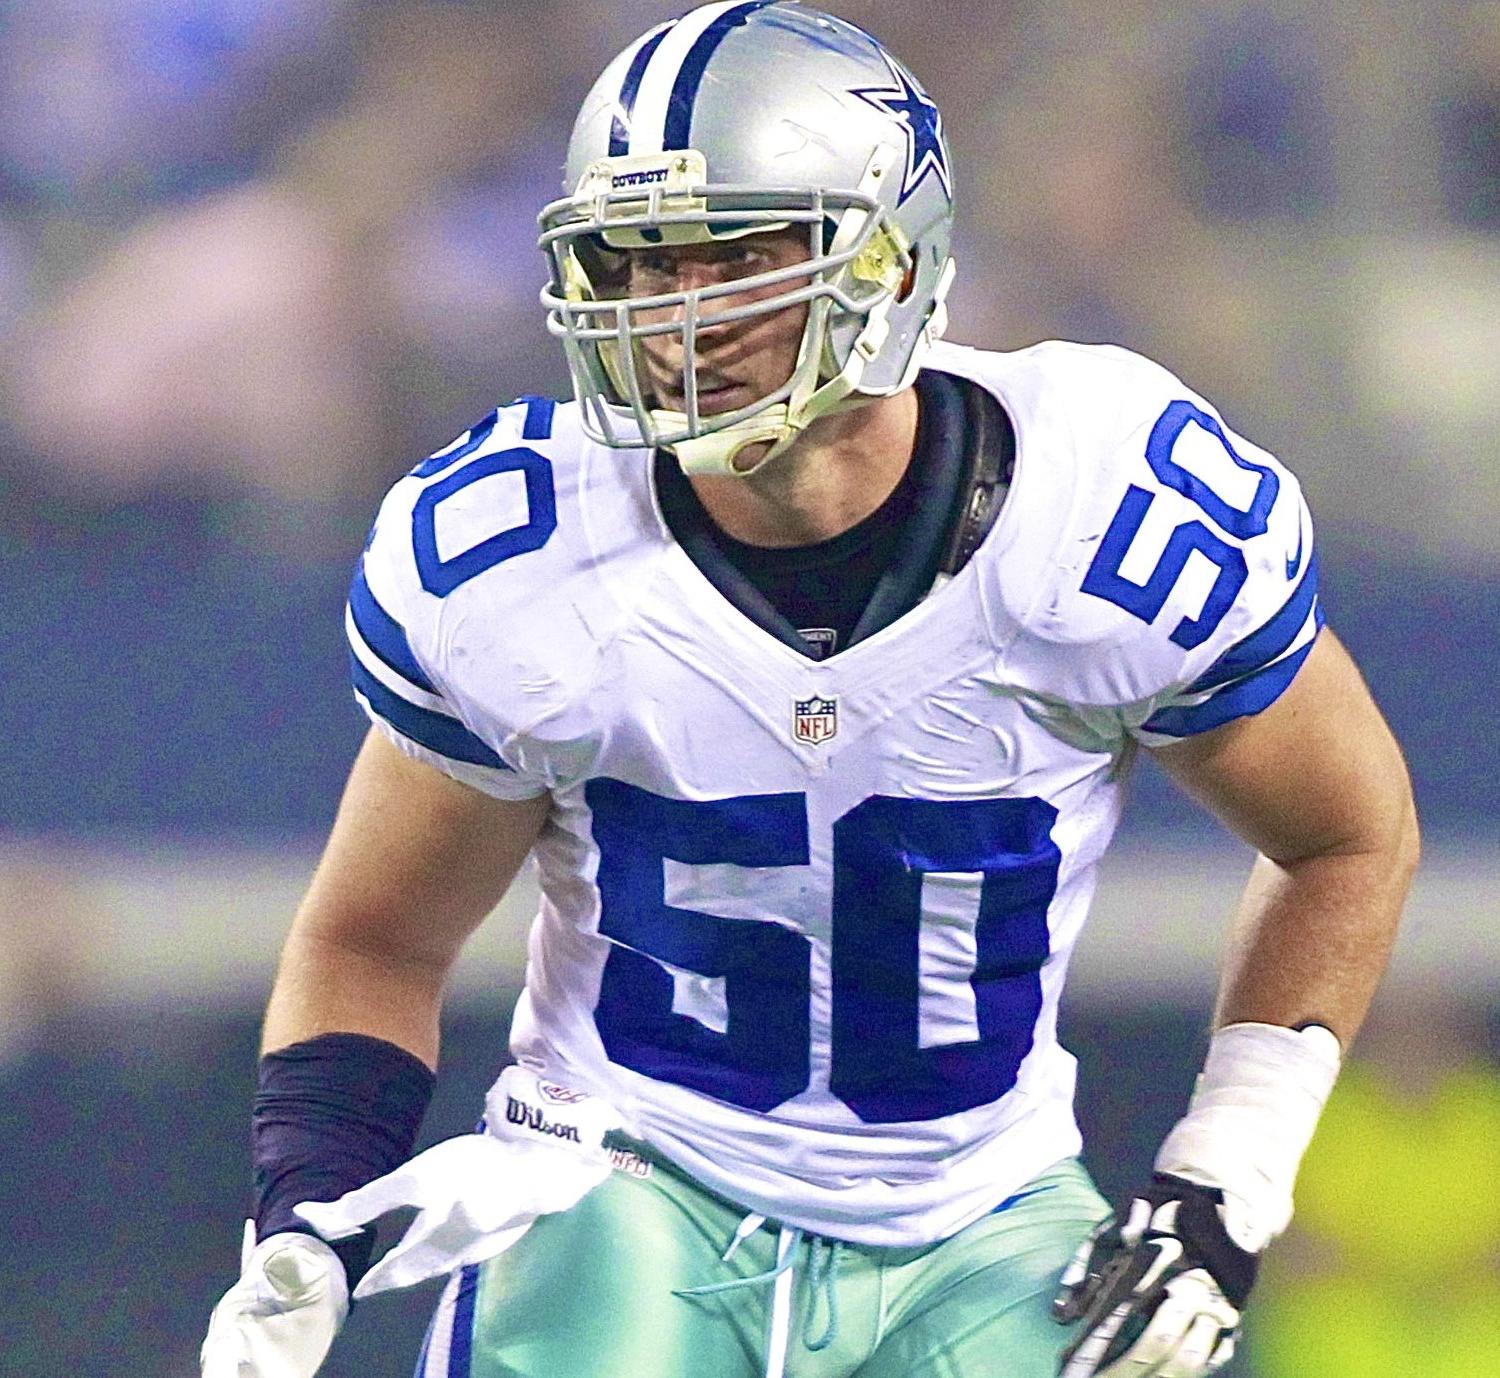 Sean Lee Comeback Player Of The Year? Inside The Star